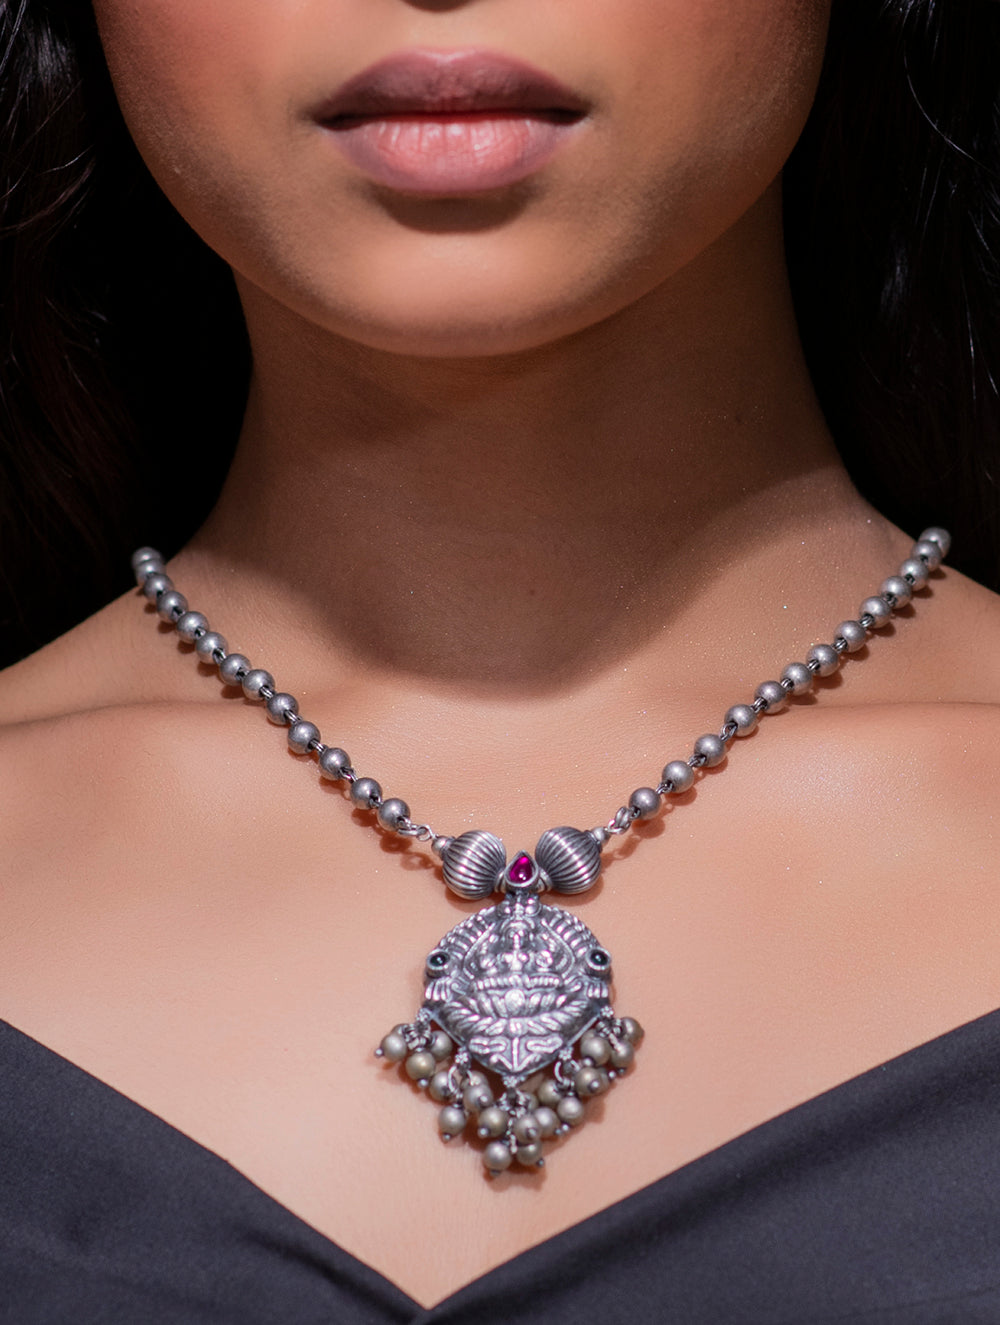 Load image into Gallery viewer, Pure Silver Traditional Maharashtrian Neckpiece - Necklace